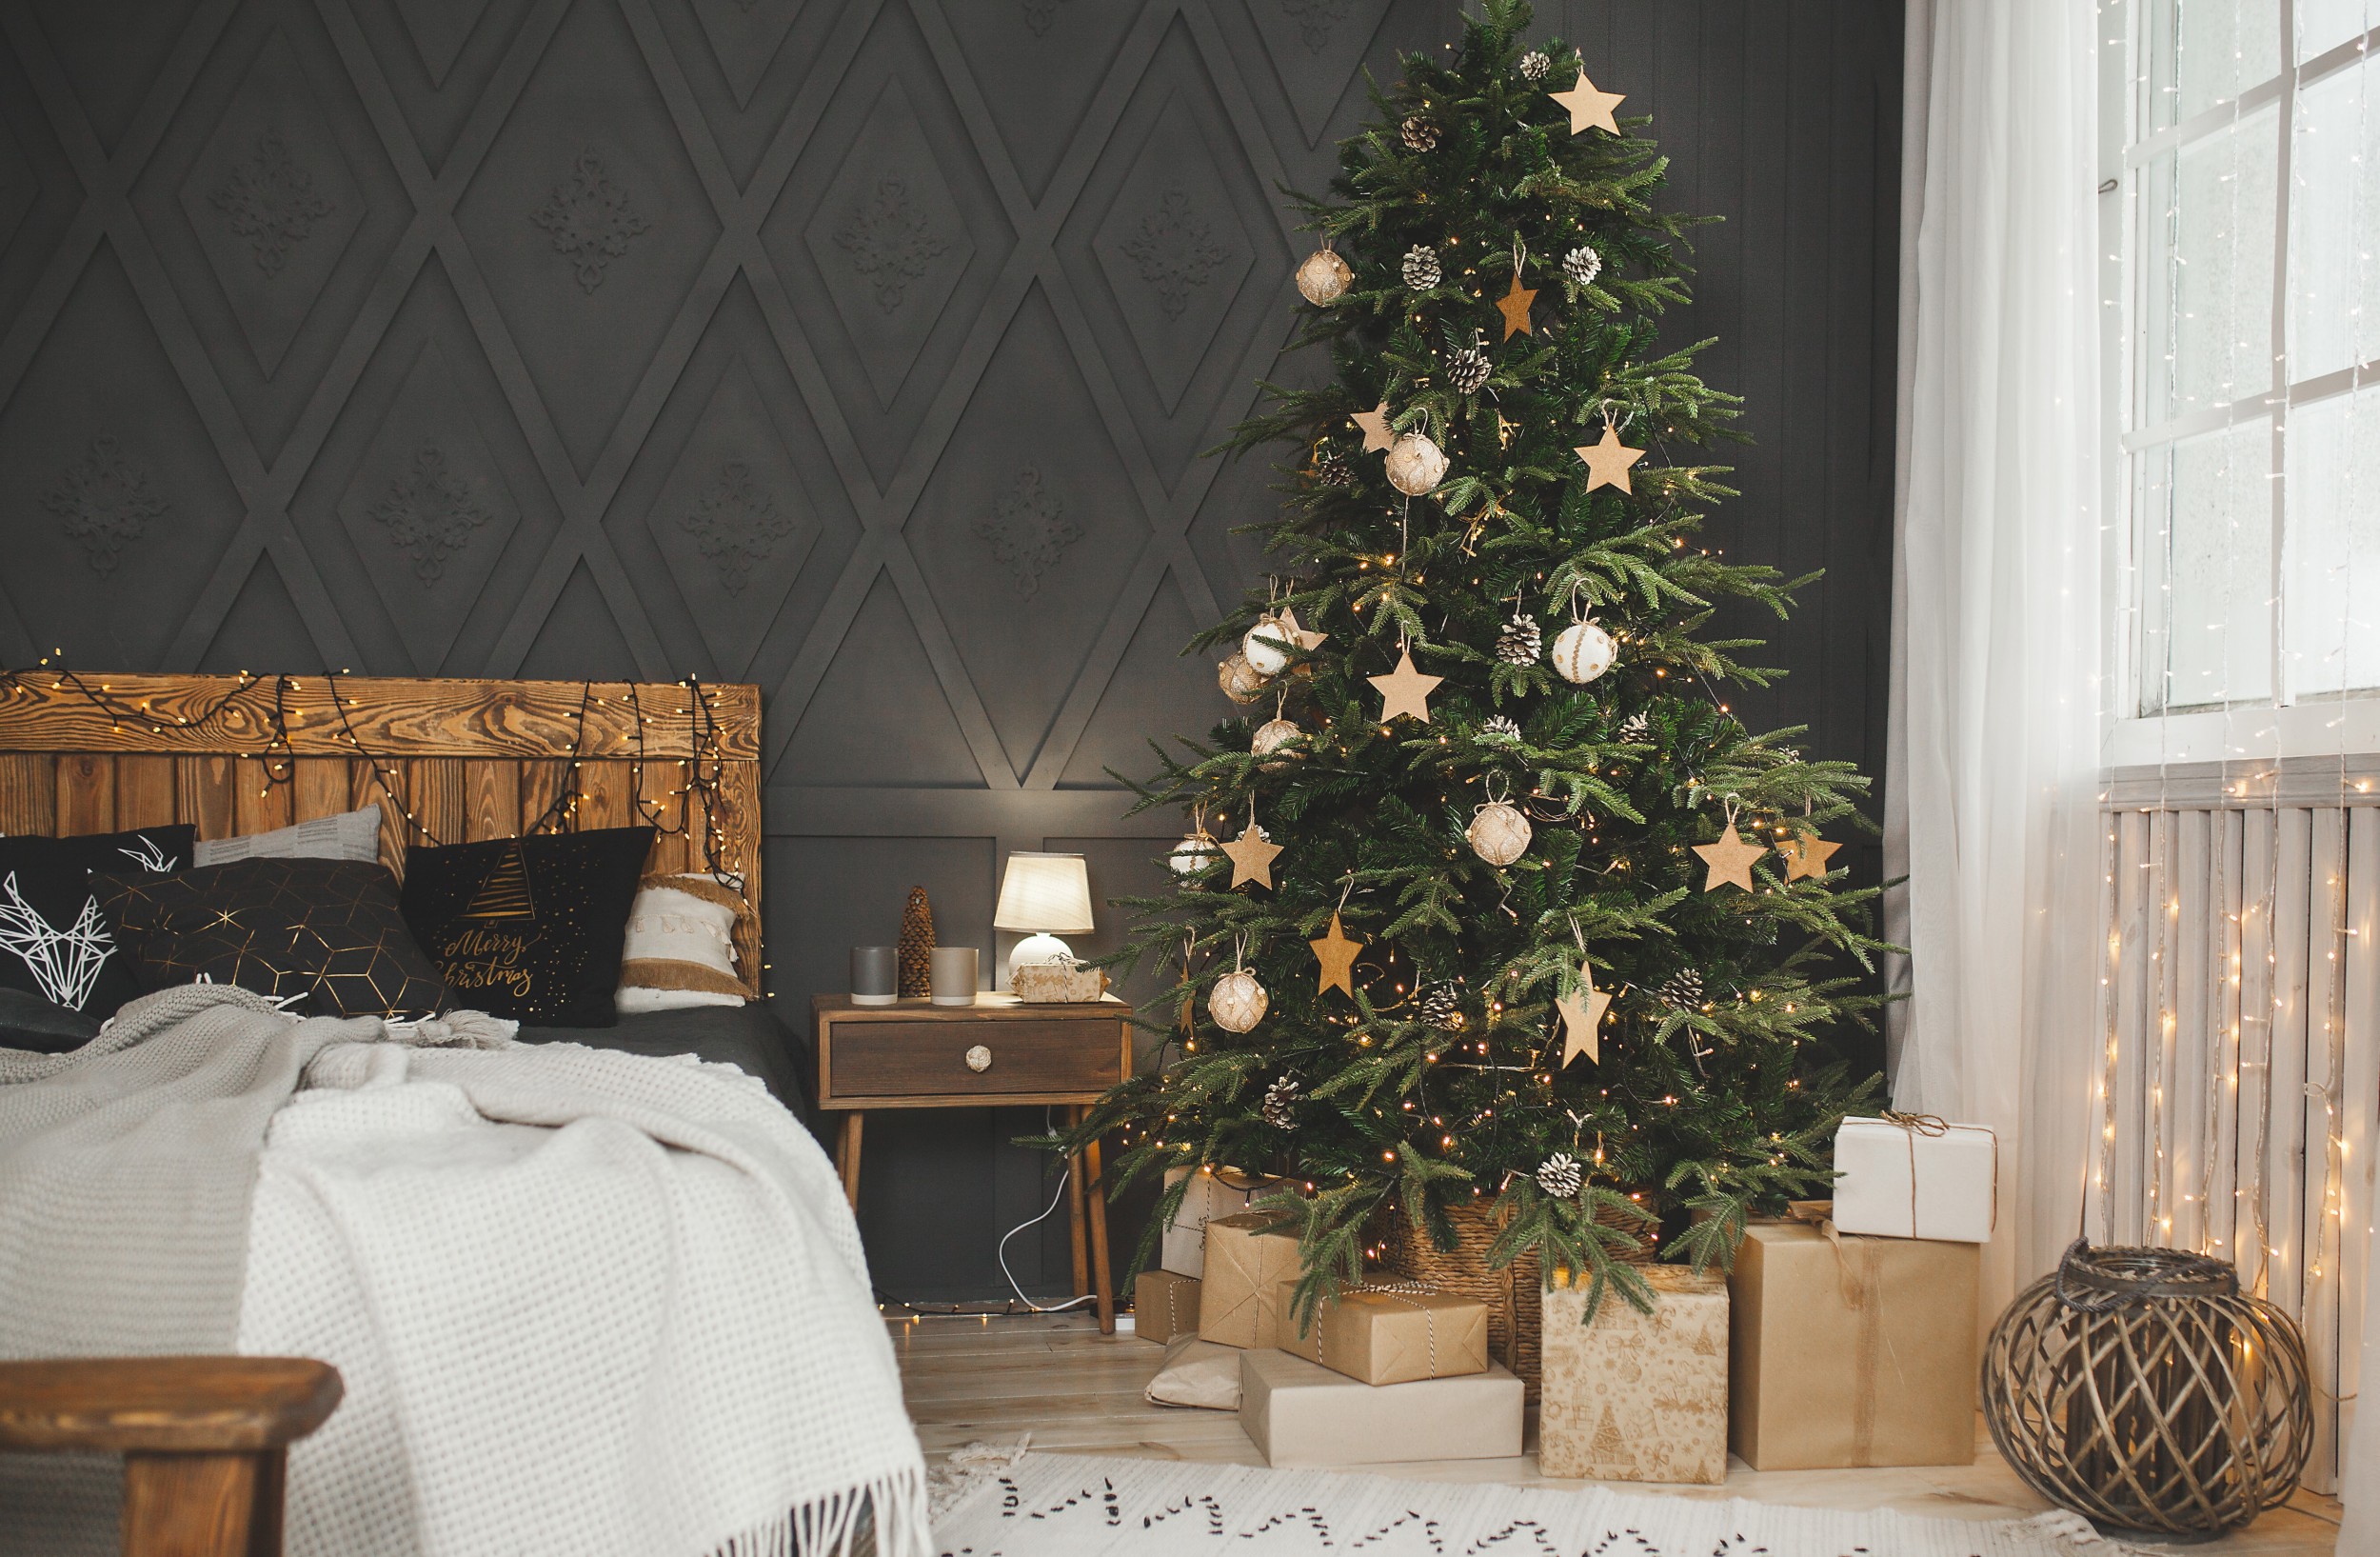 How to perfect your country Christmas interior